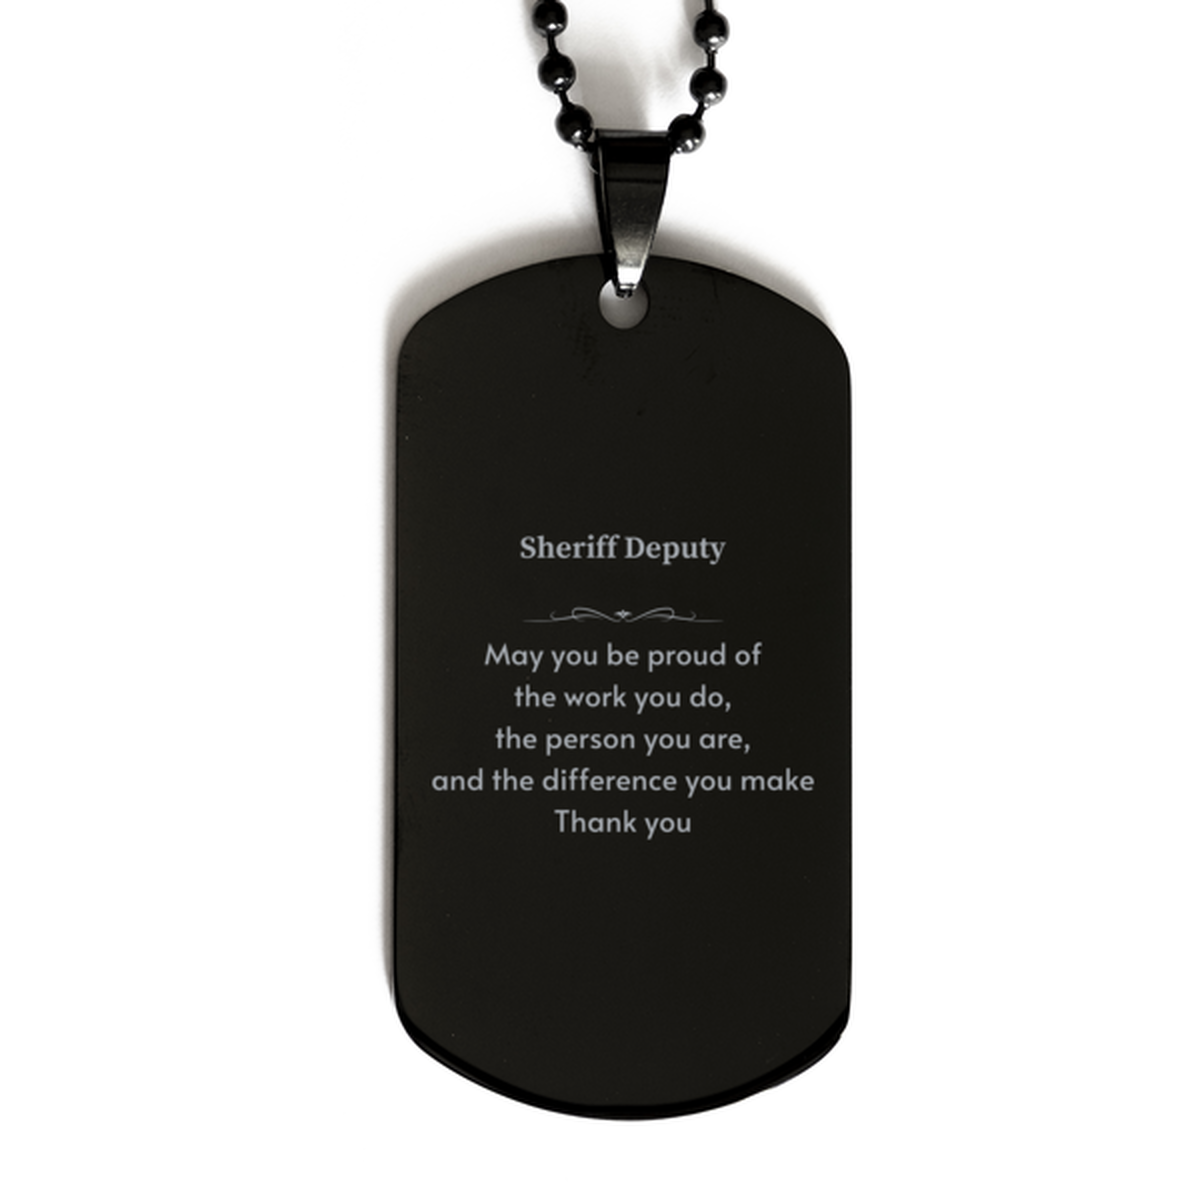 Heartwarming Black Dog Tag Retirement Coworkers Gifts for Sheriff Deputy, Sheriff Deputy May You be proud of the work you do, the person you are Gifts for Boss Men Women Friends